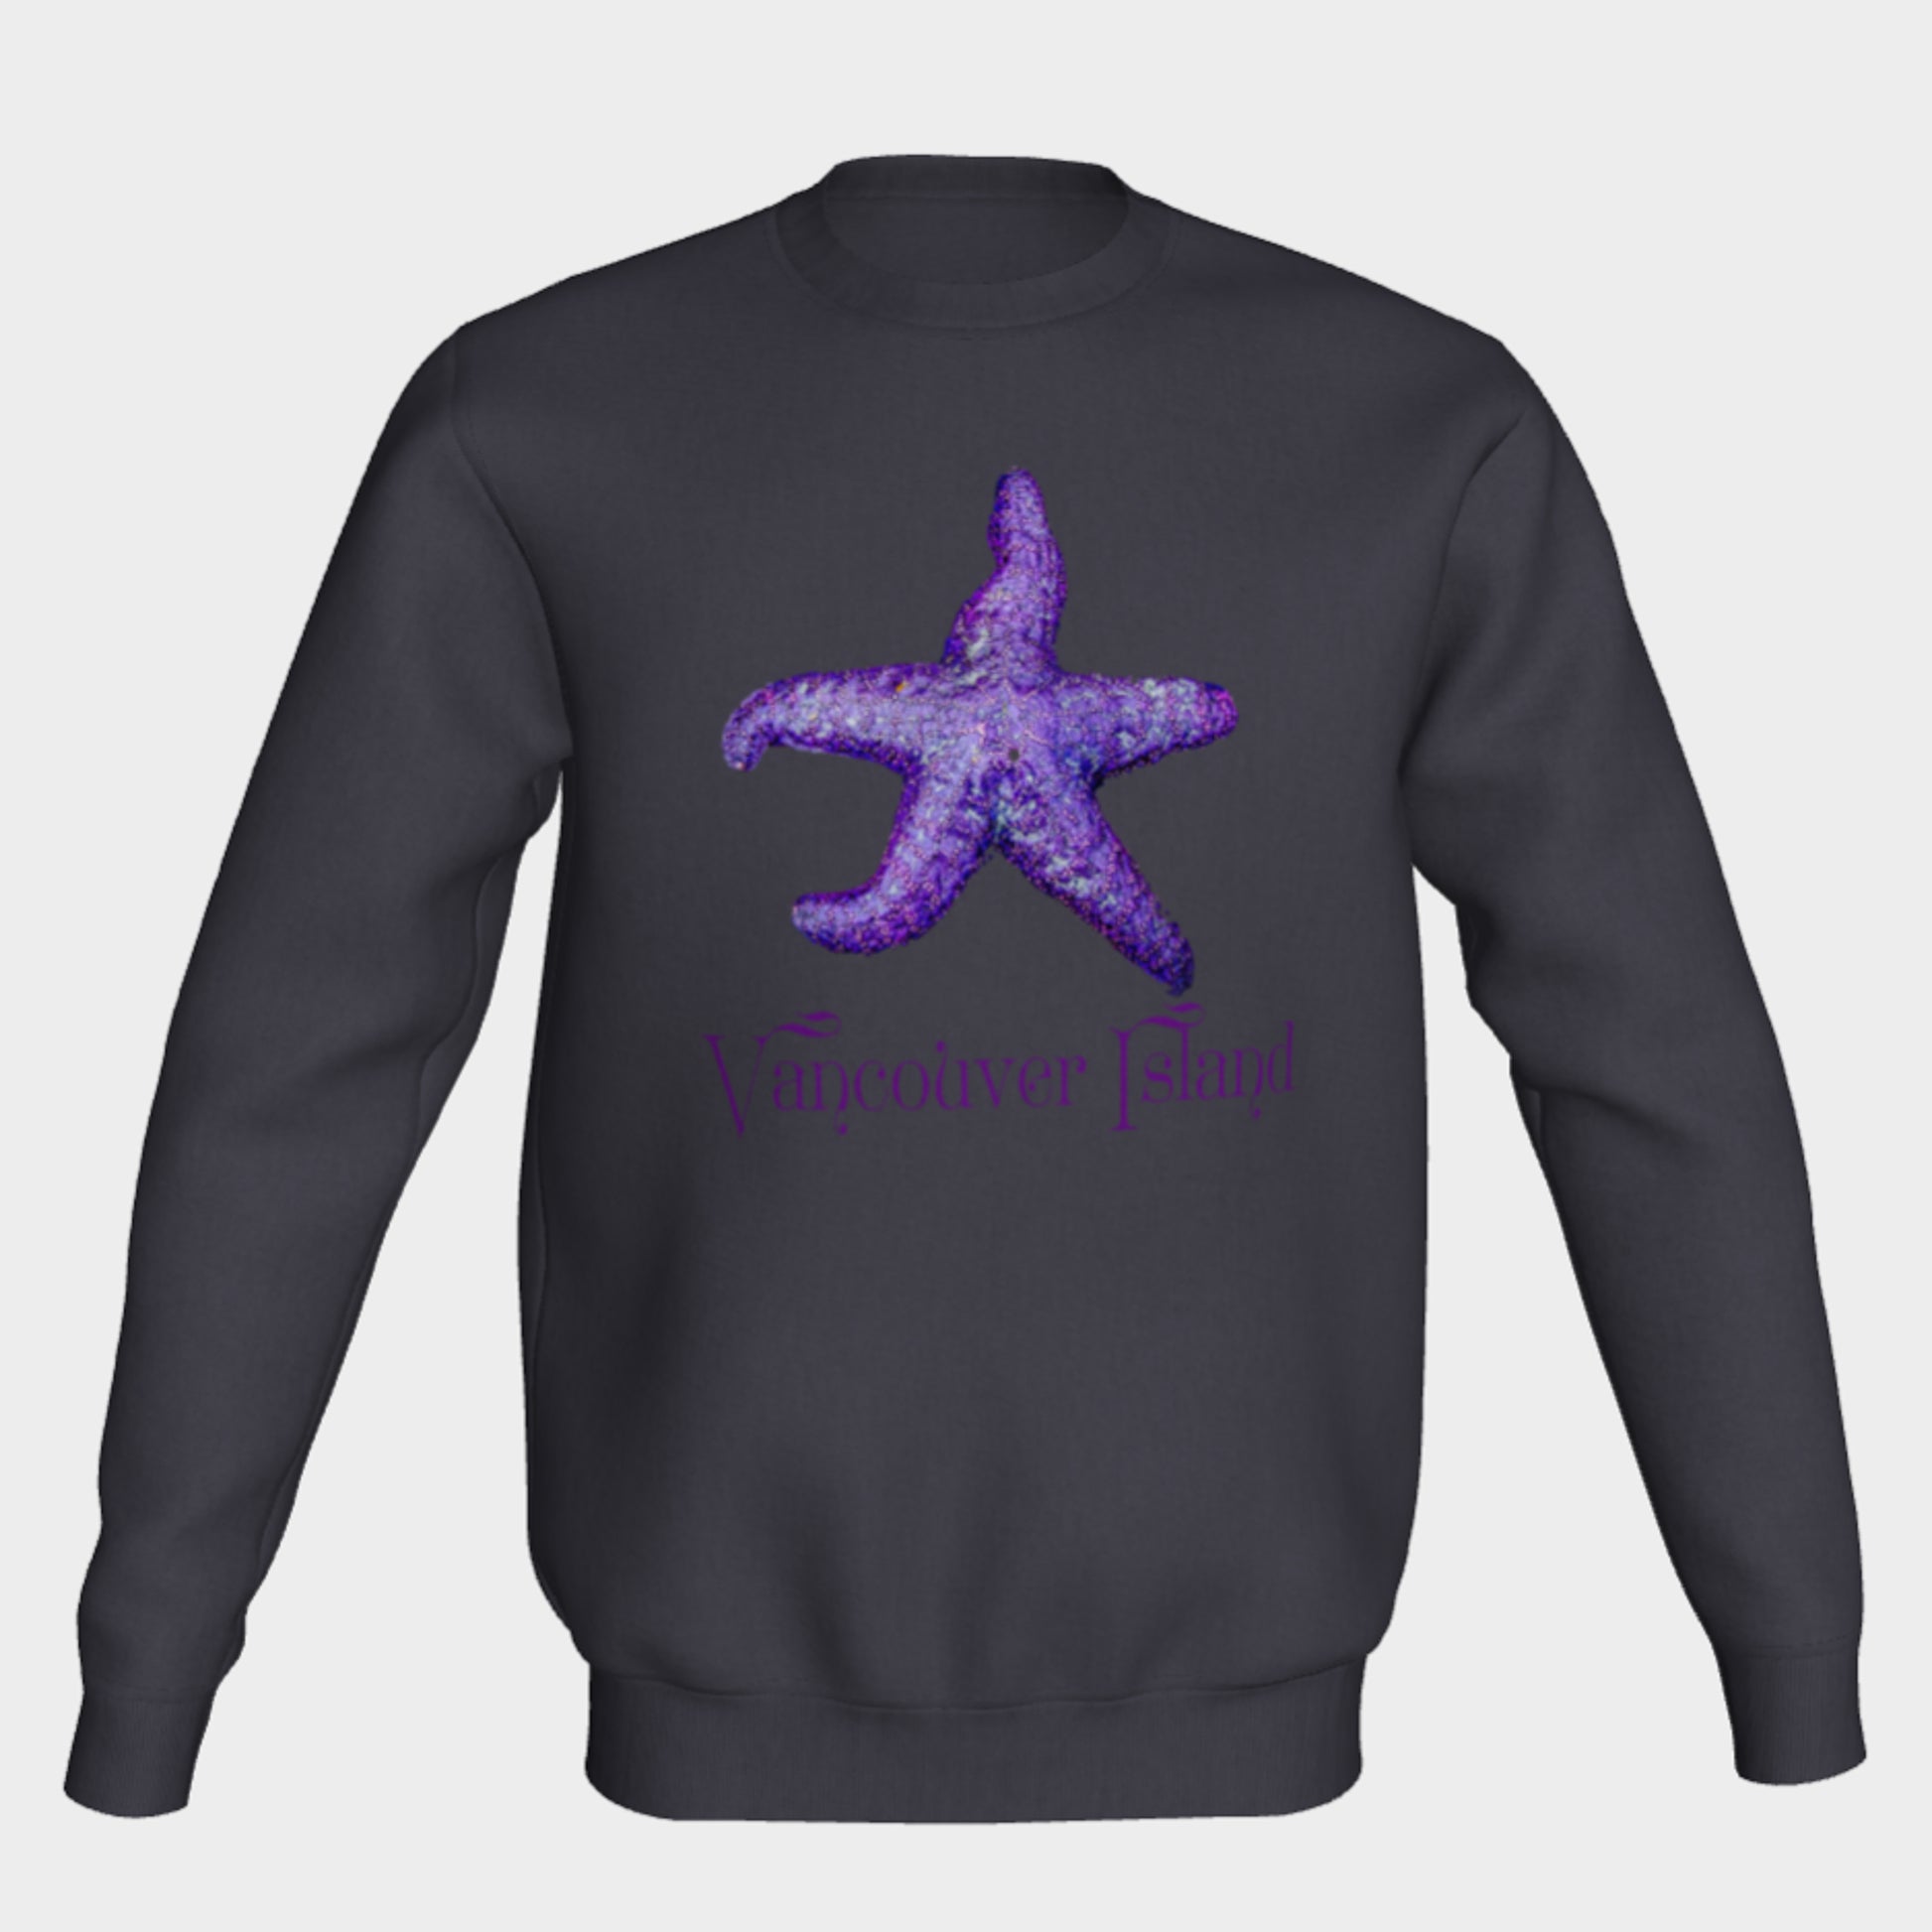 Starfish Vancouver Island Crewneck Sweatshirt What’s better than a super cozy sweatshirt? A super cozy sweatshirt from Van Isle Goddess!  Super cozy unisex sweatshirt for those chilly days.  Excellent for men or women.   Fit is roomy and comfortable. 